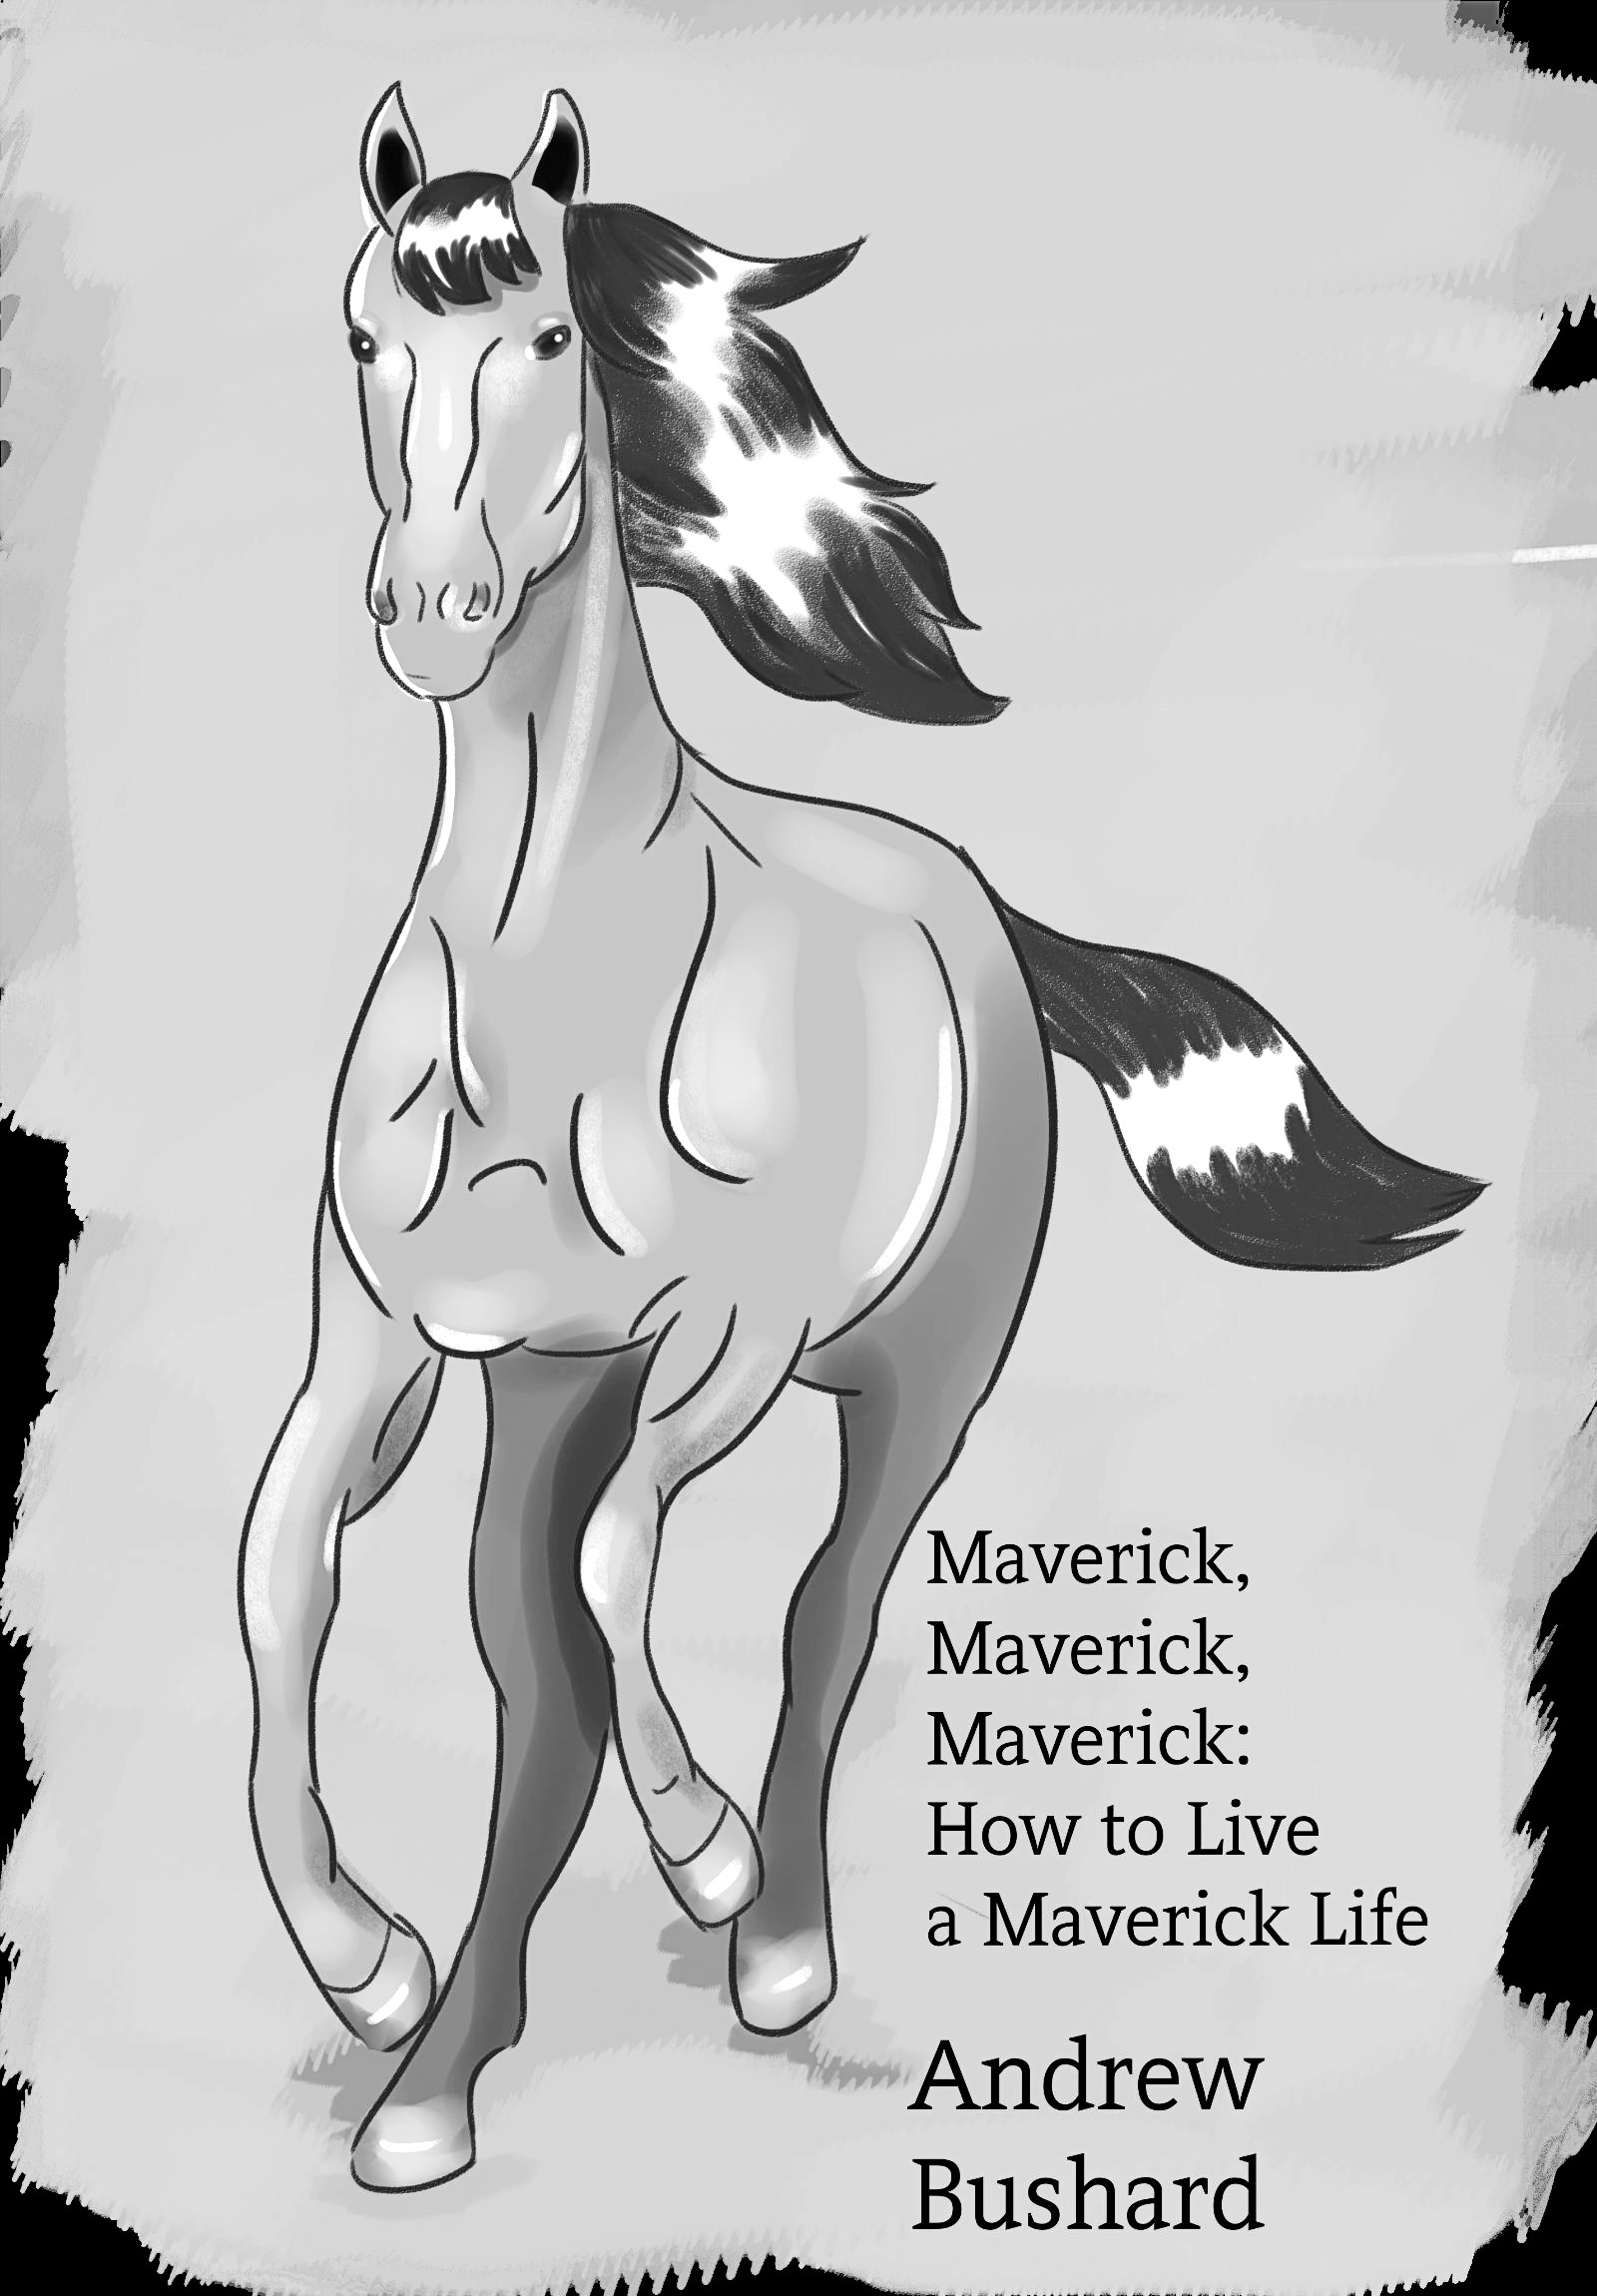 Maverick, Maverick, Maverick: How to Live a Maverick Life's featured image